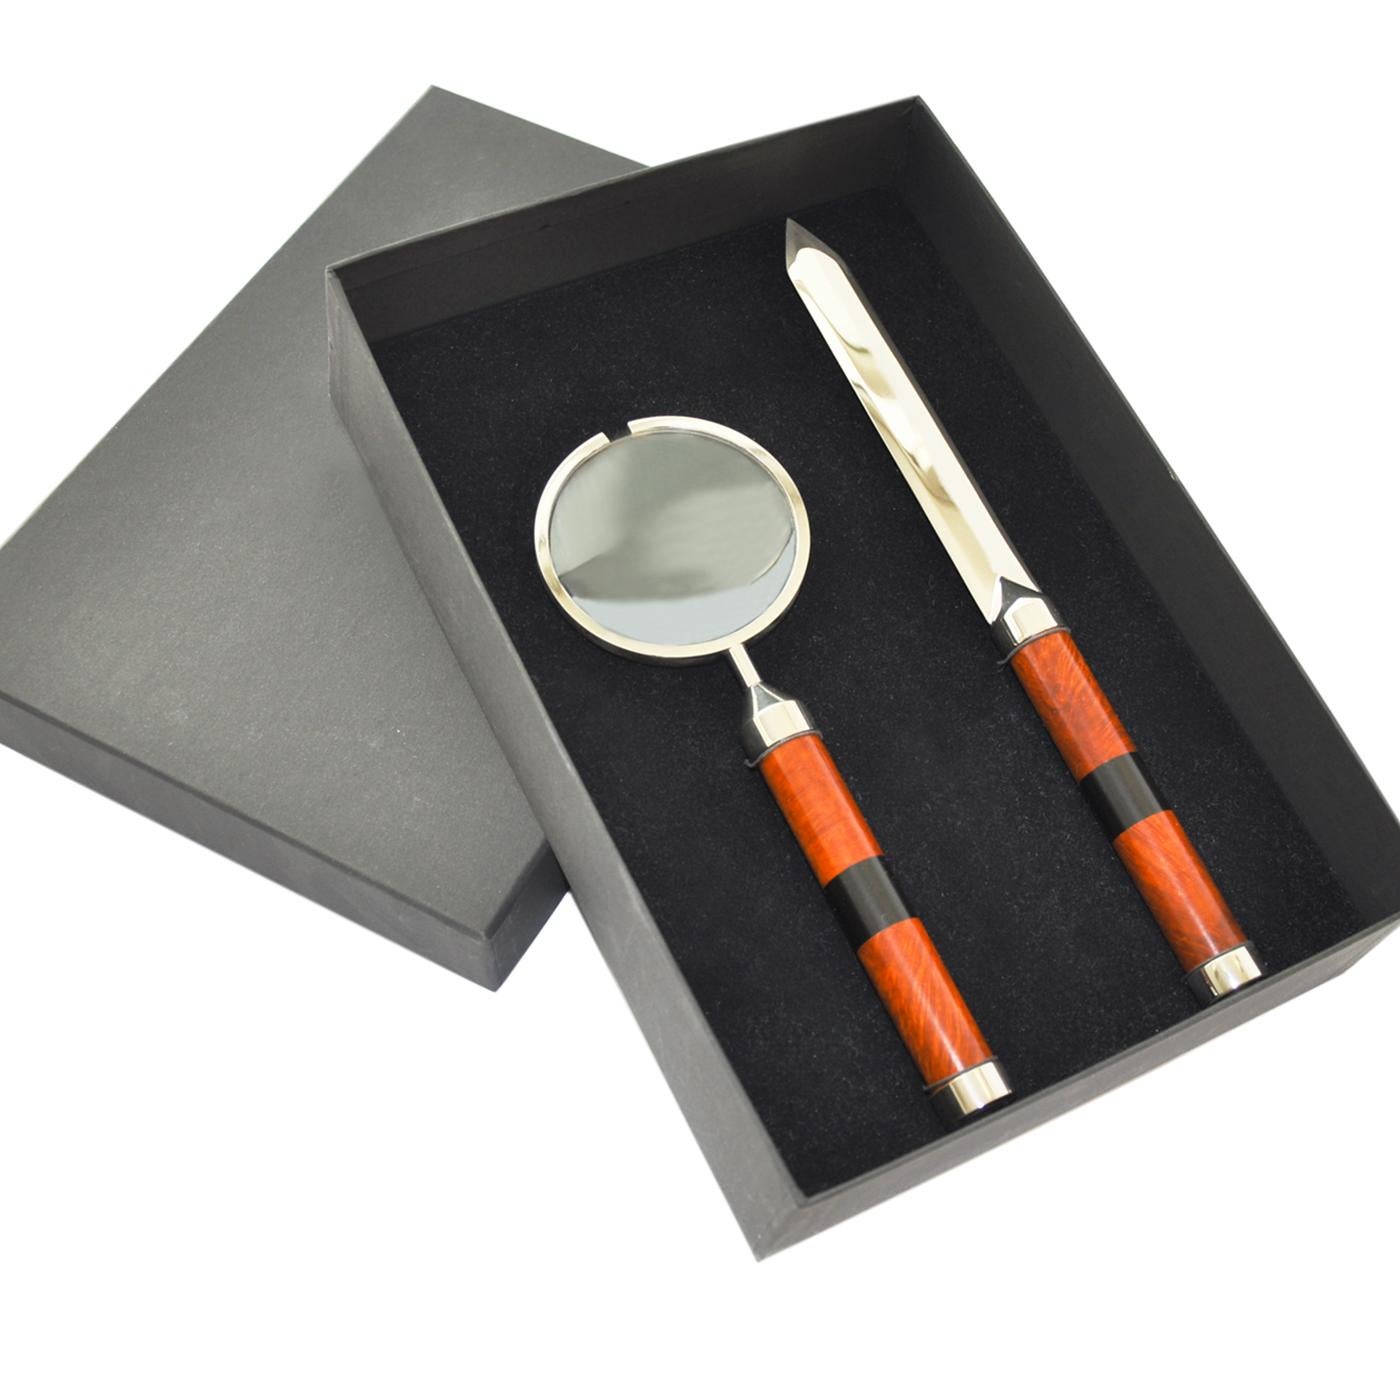 Elegant letter opener set having a sophisticated handle made of erica, the precious wood used to make luxury pipes, combined with an elegant and decorative element made of ebony wood. Letter opener and magnifying lens set distinguished by its